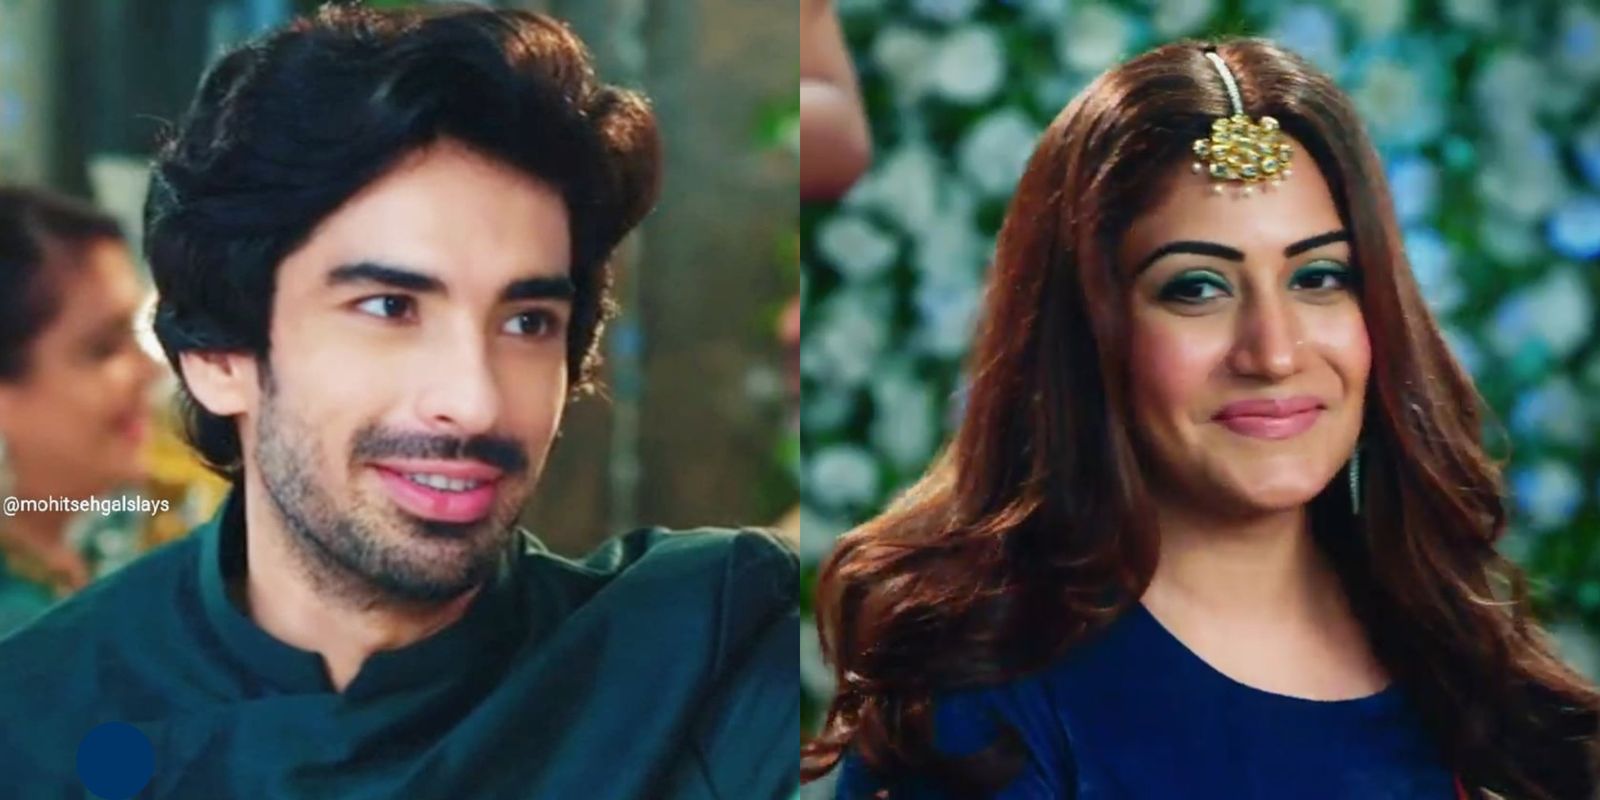 Naagin 5: Netizens Can’t Stop Gushing Over Mohit Sehgal And Surbhi Chandna; Ship ‘Jay-Bani’